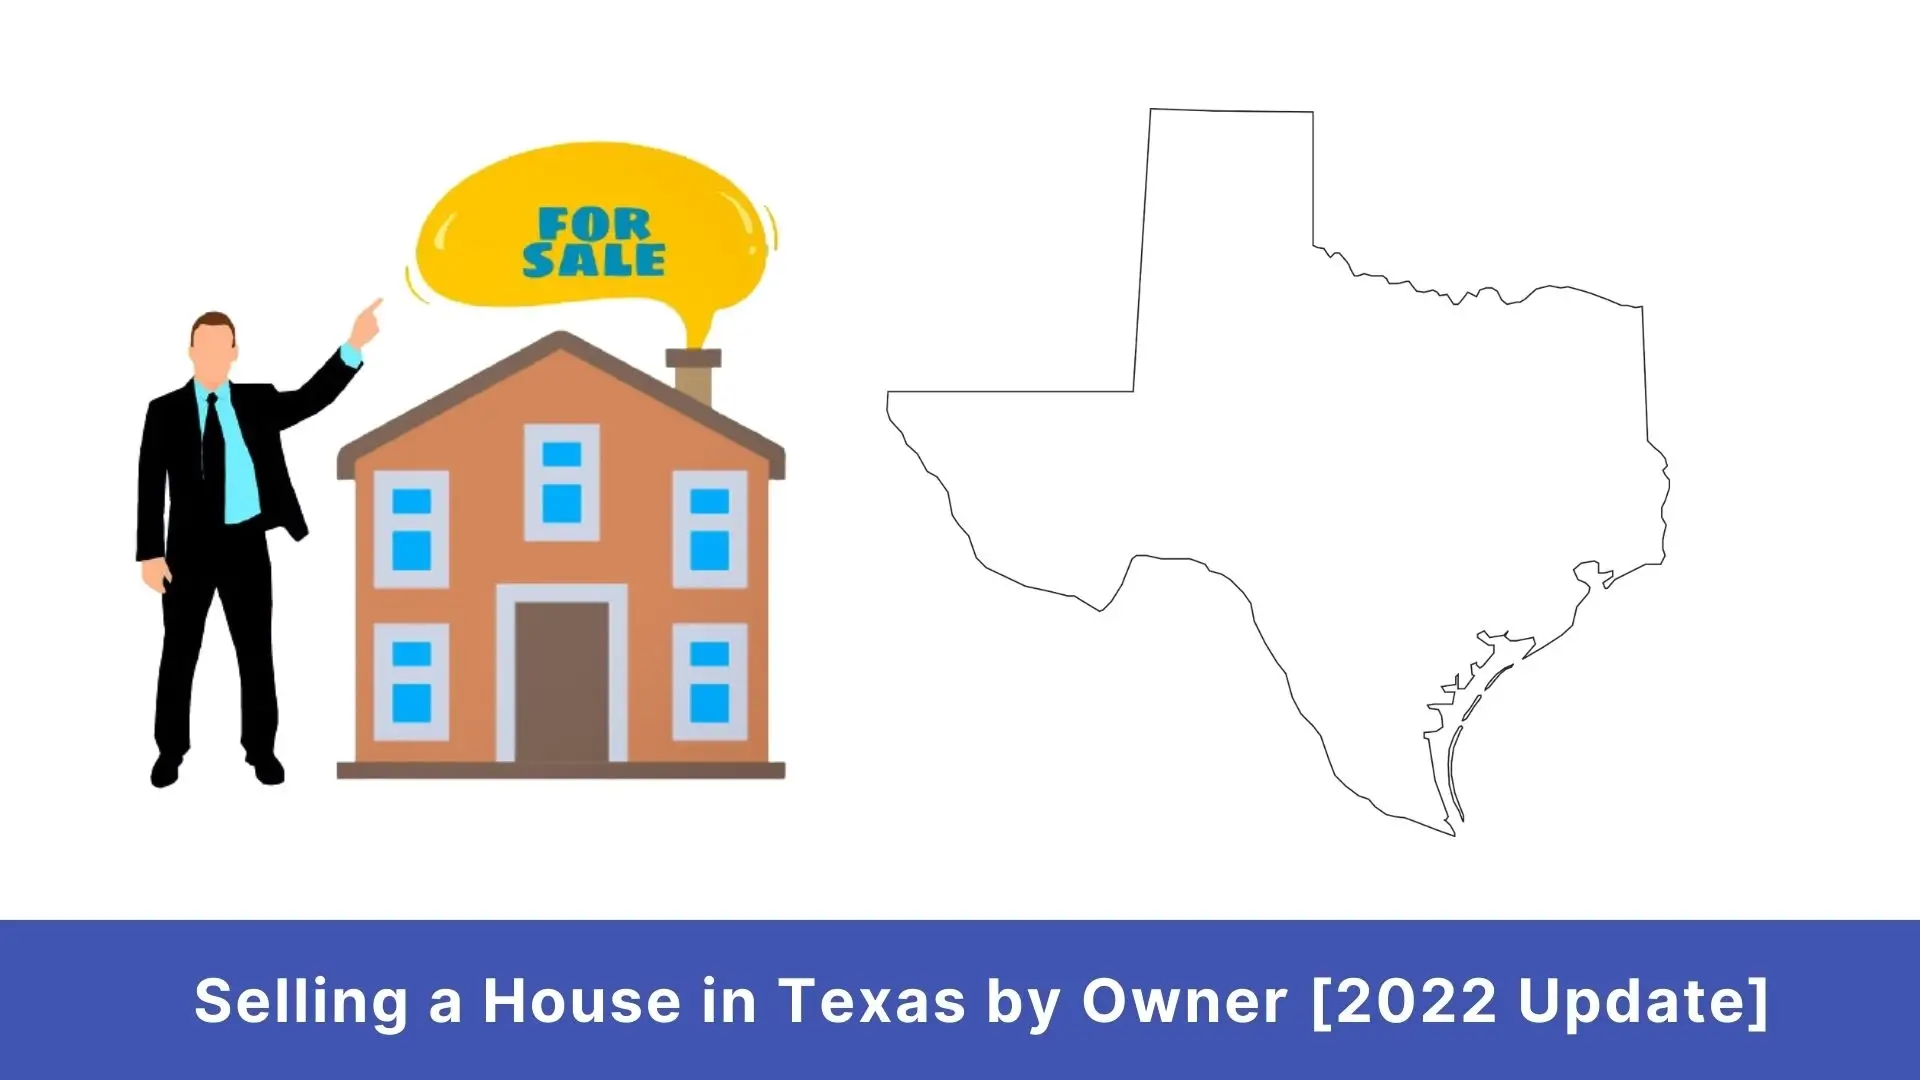 Selling a house in Texas by owner